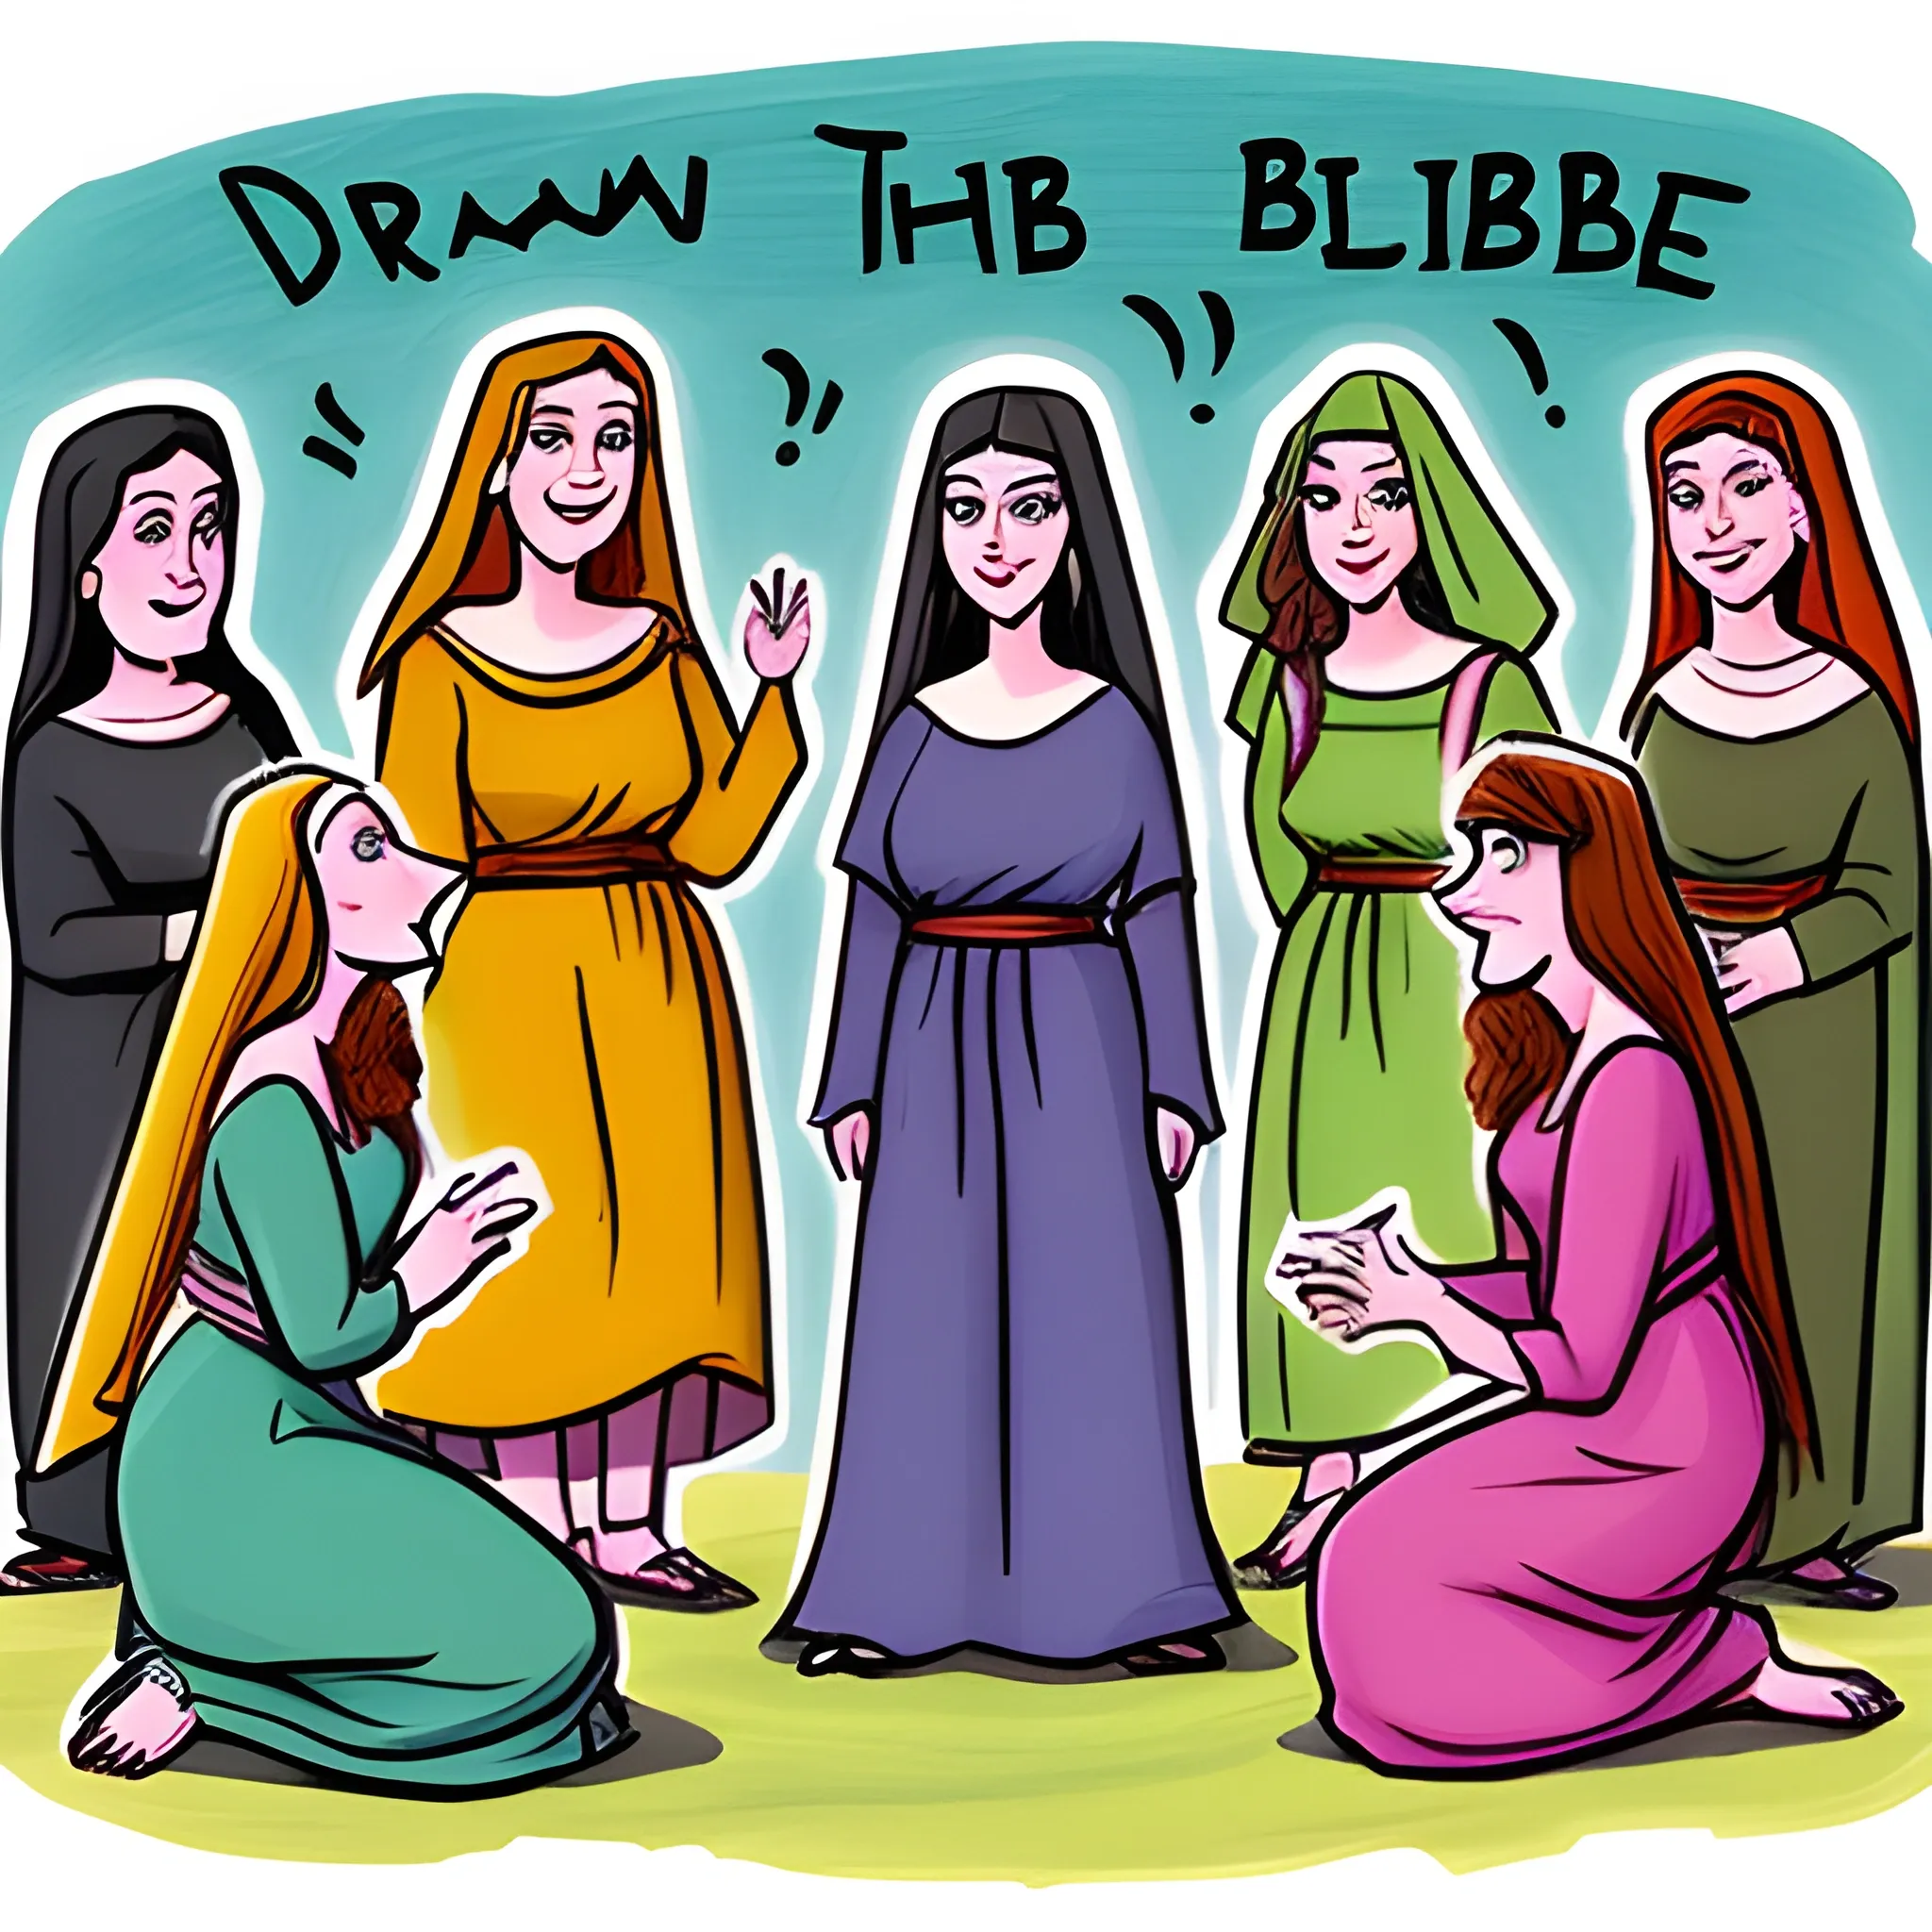  Draw a GROUP OF THE WOMEN IN THE BIBLE, Cartoon